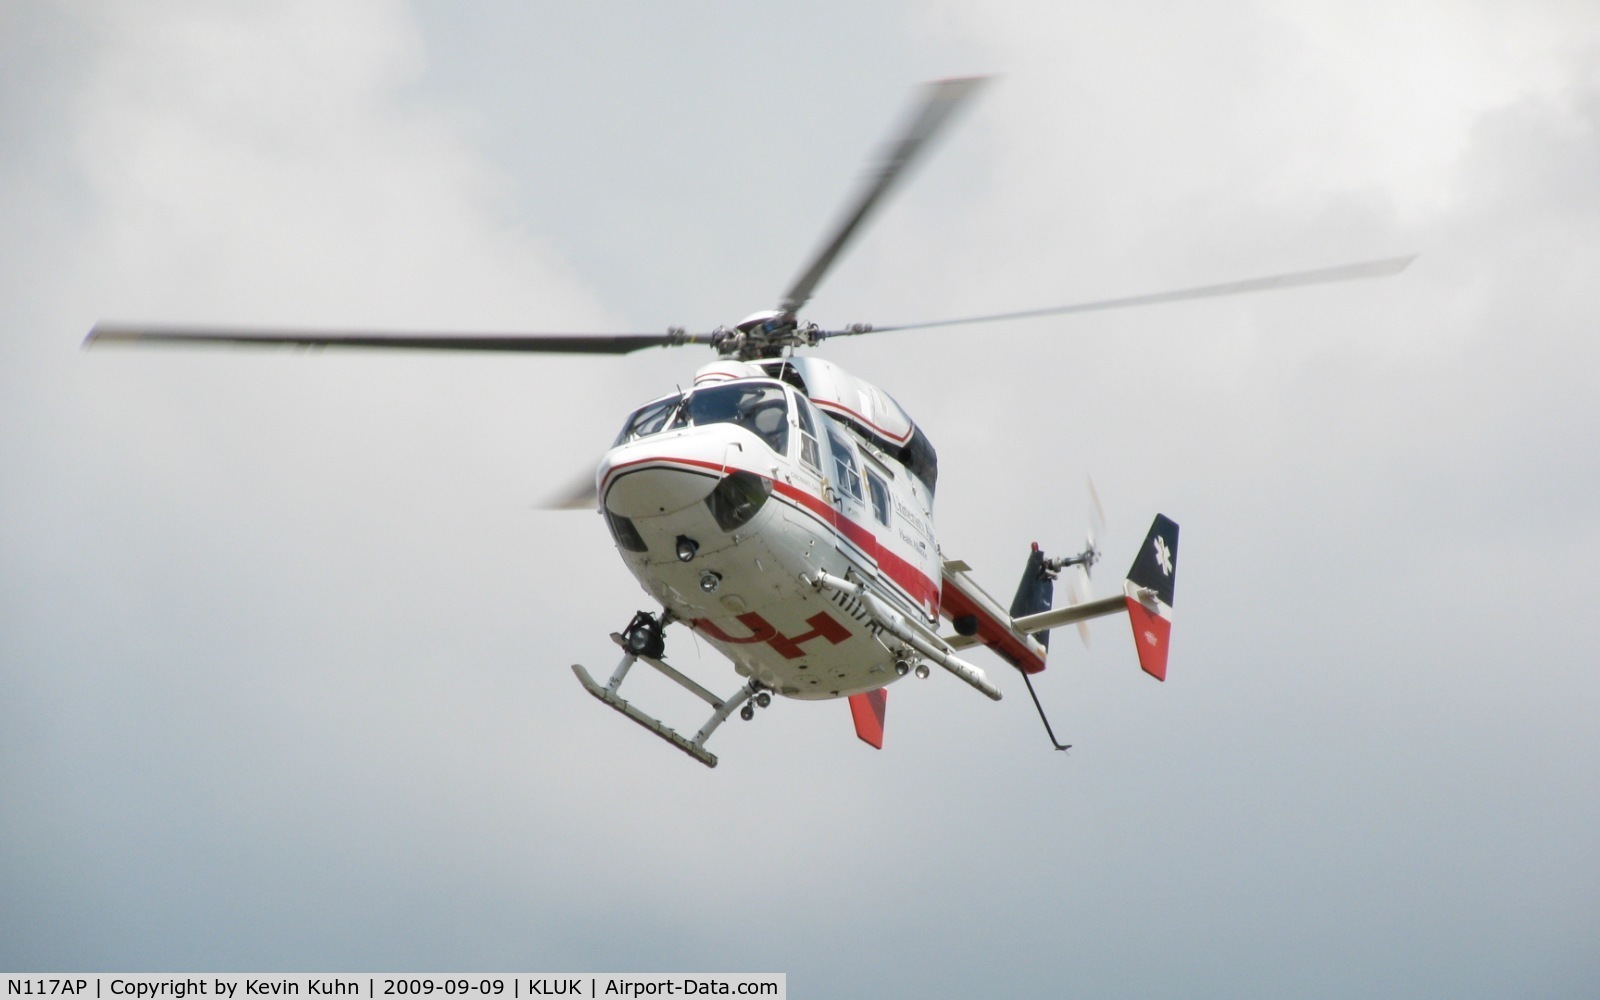 N117AP, Eurocopter-Kawasaki BK-117B-1 C/N 7144, The University Air Care helos are usually game for a nice low takeoff